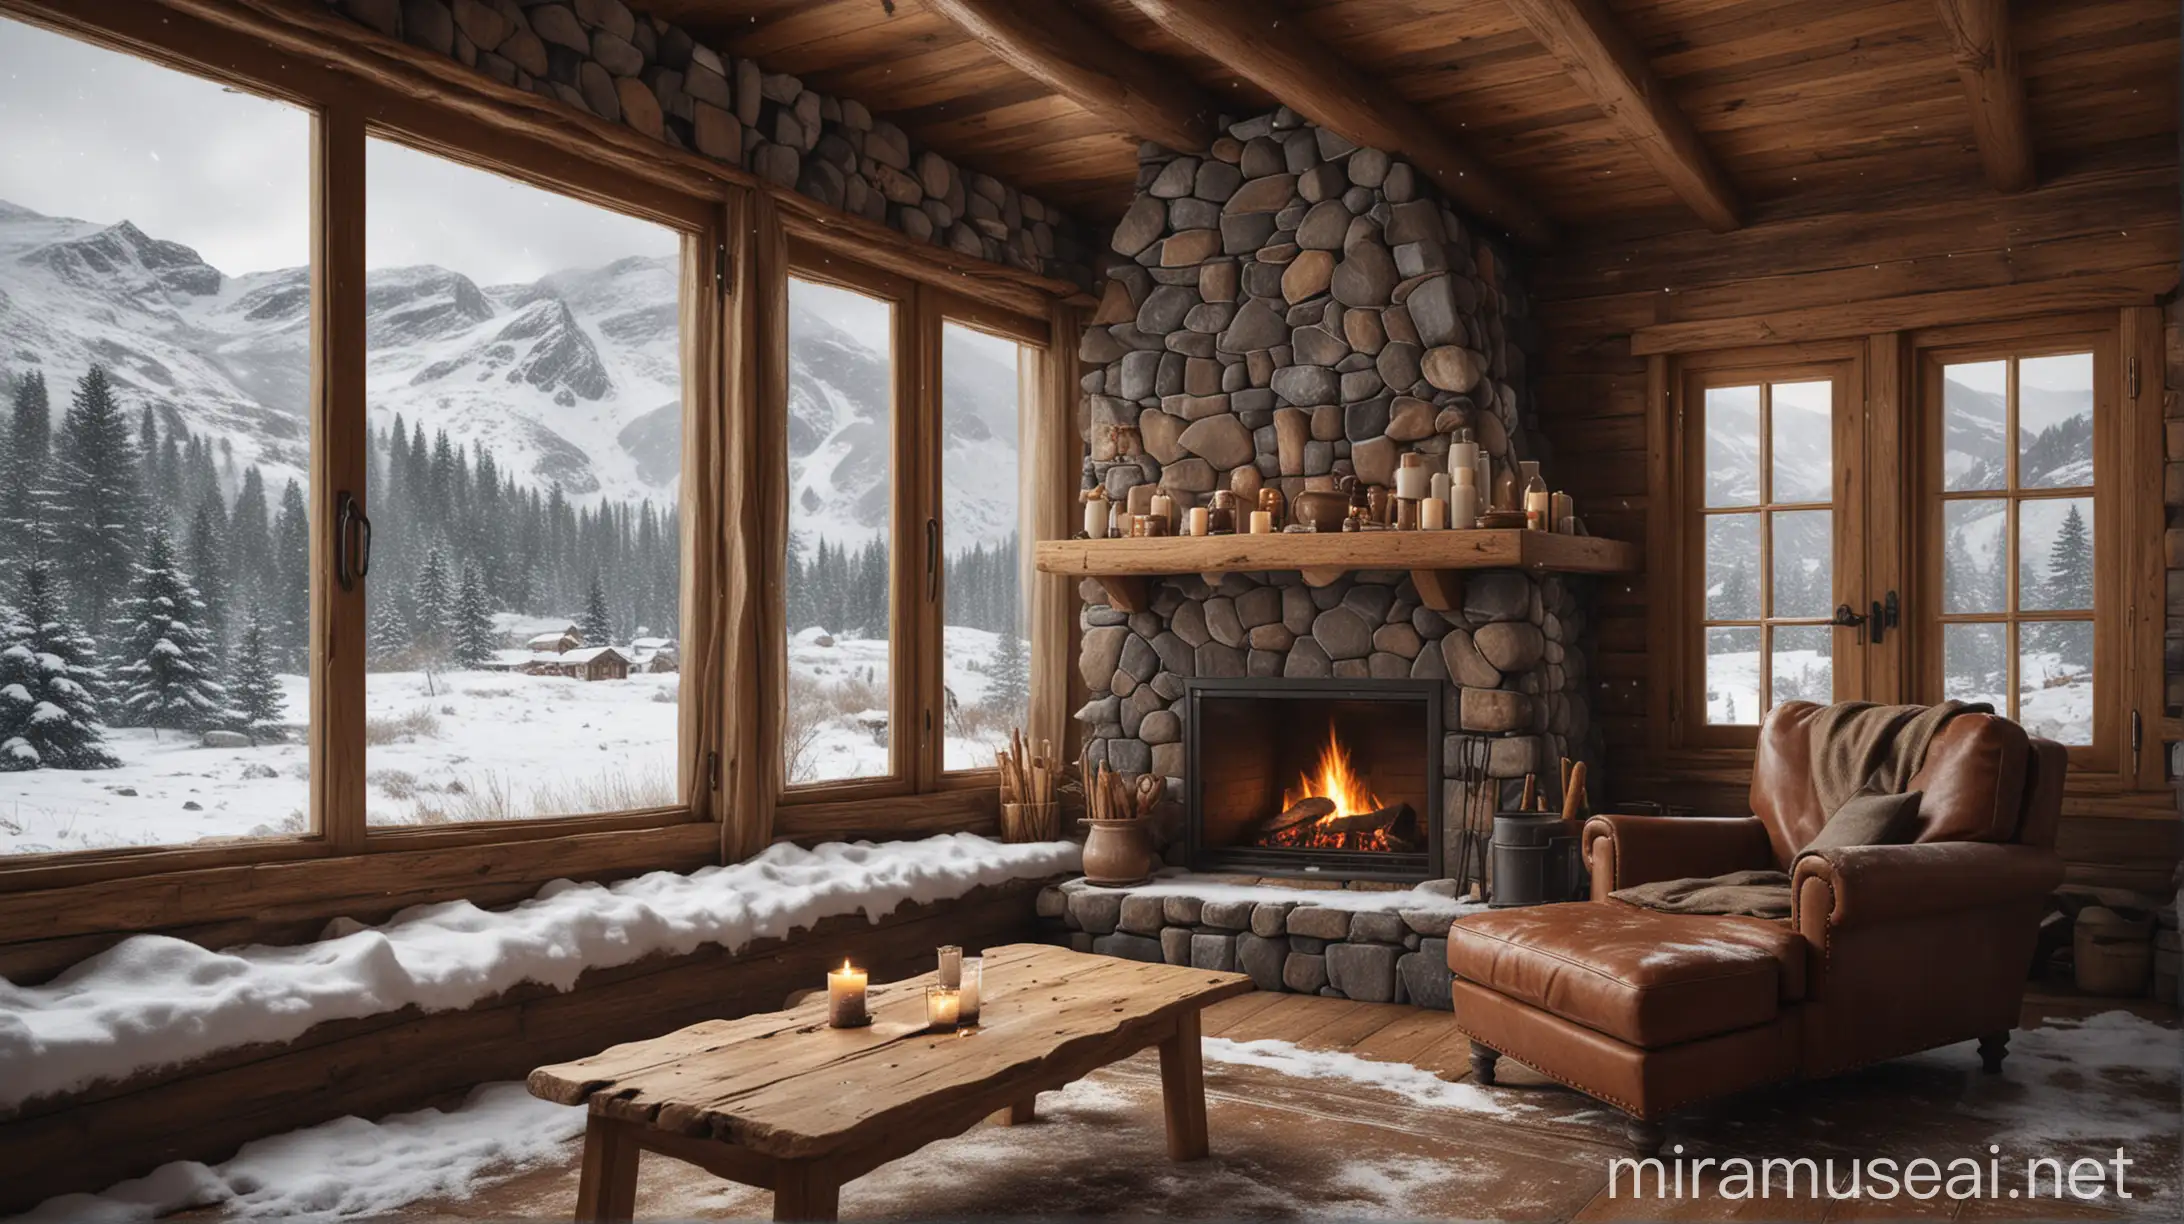 Cozy Cabin in Snowy Mountains with Fireplace and Candlelight